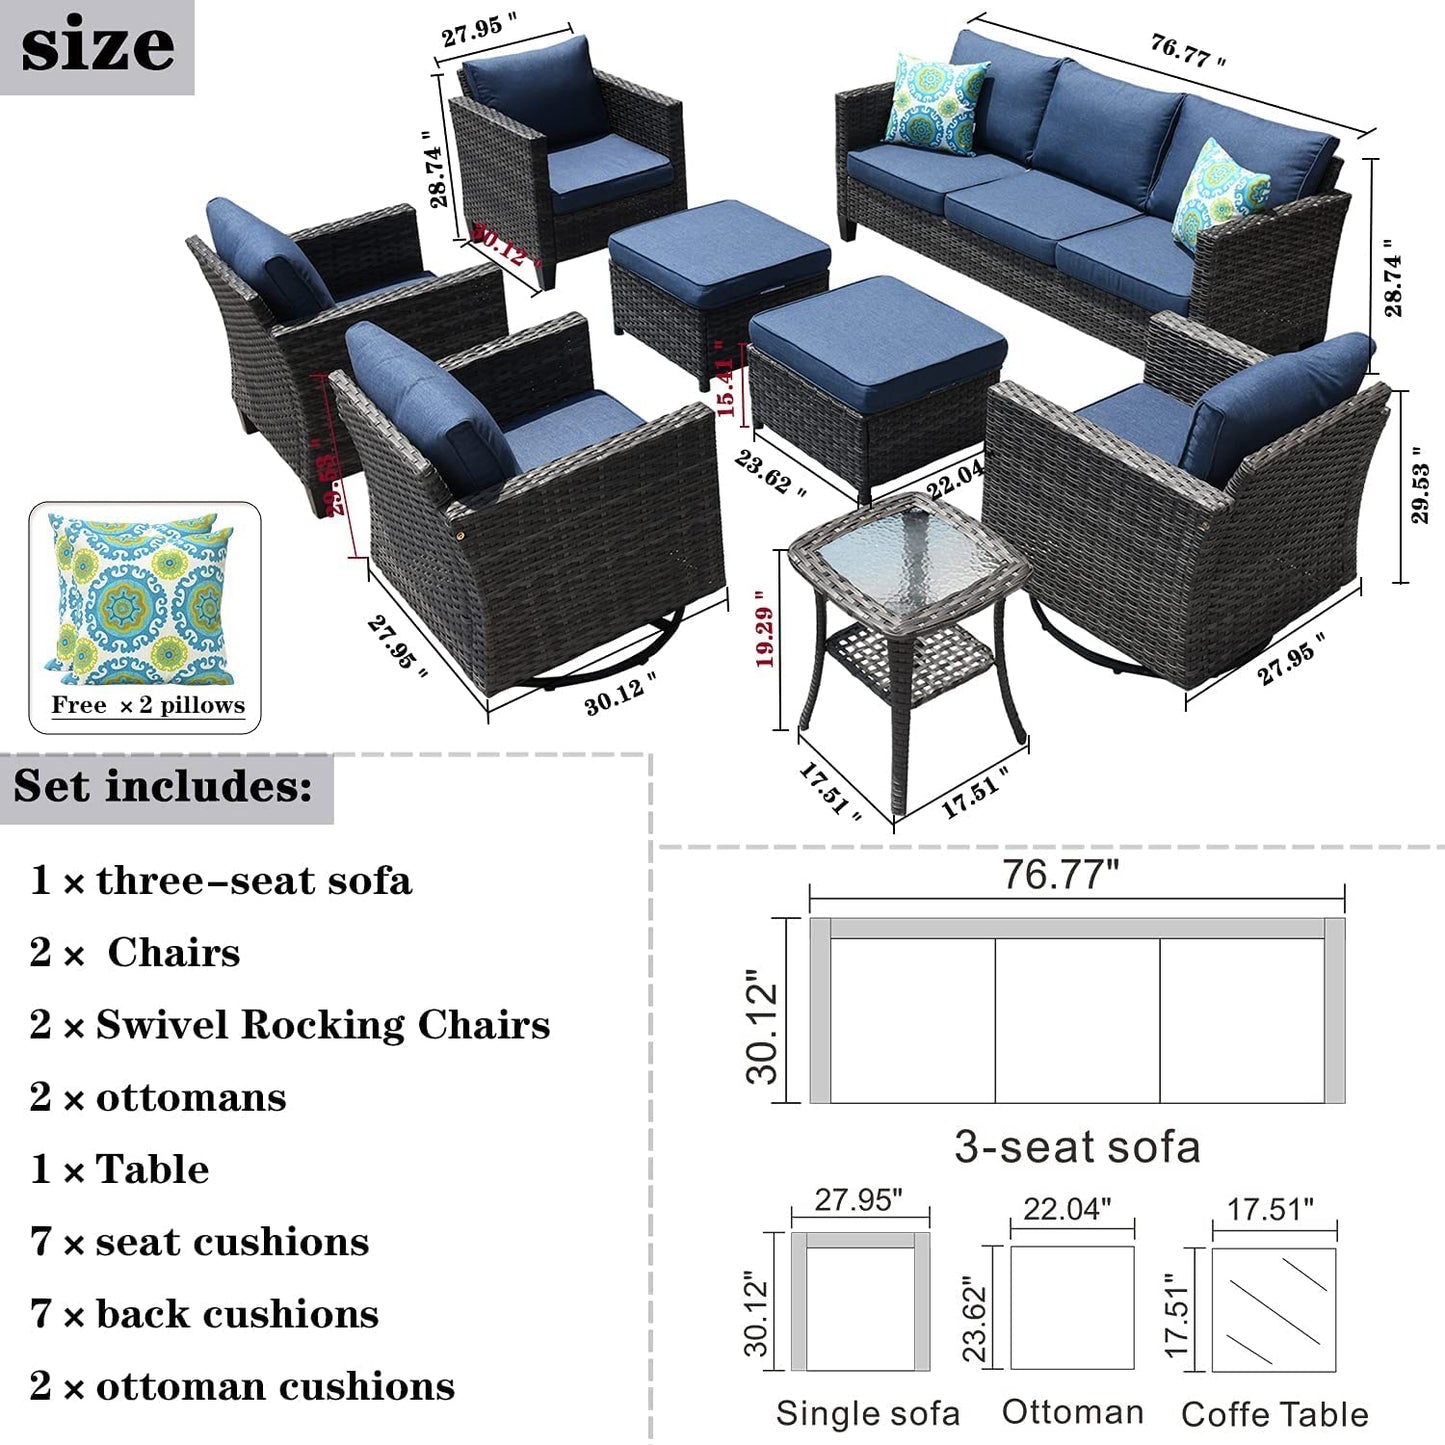 ovios Patio Furniture Set 8 Pieces Outdoor Wicker Rocking Swivel Chairs Sectional Sofa Set with Single Chairs High Back Rattan Sofa for Yard Garden Porch, Denim Blue